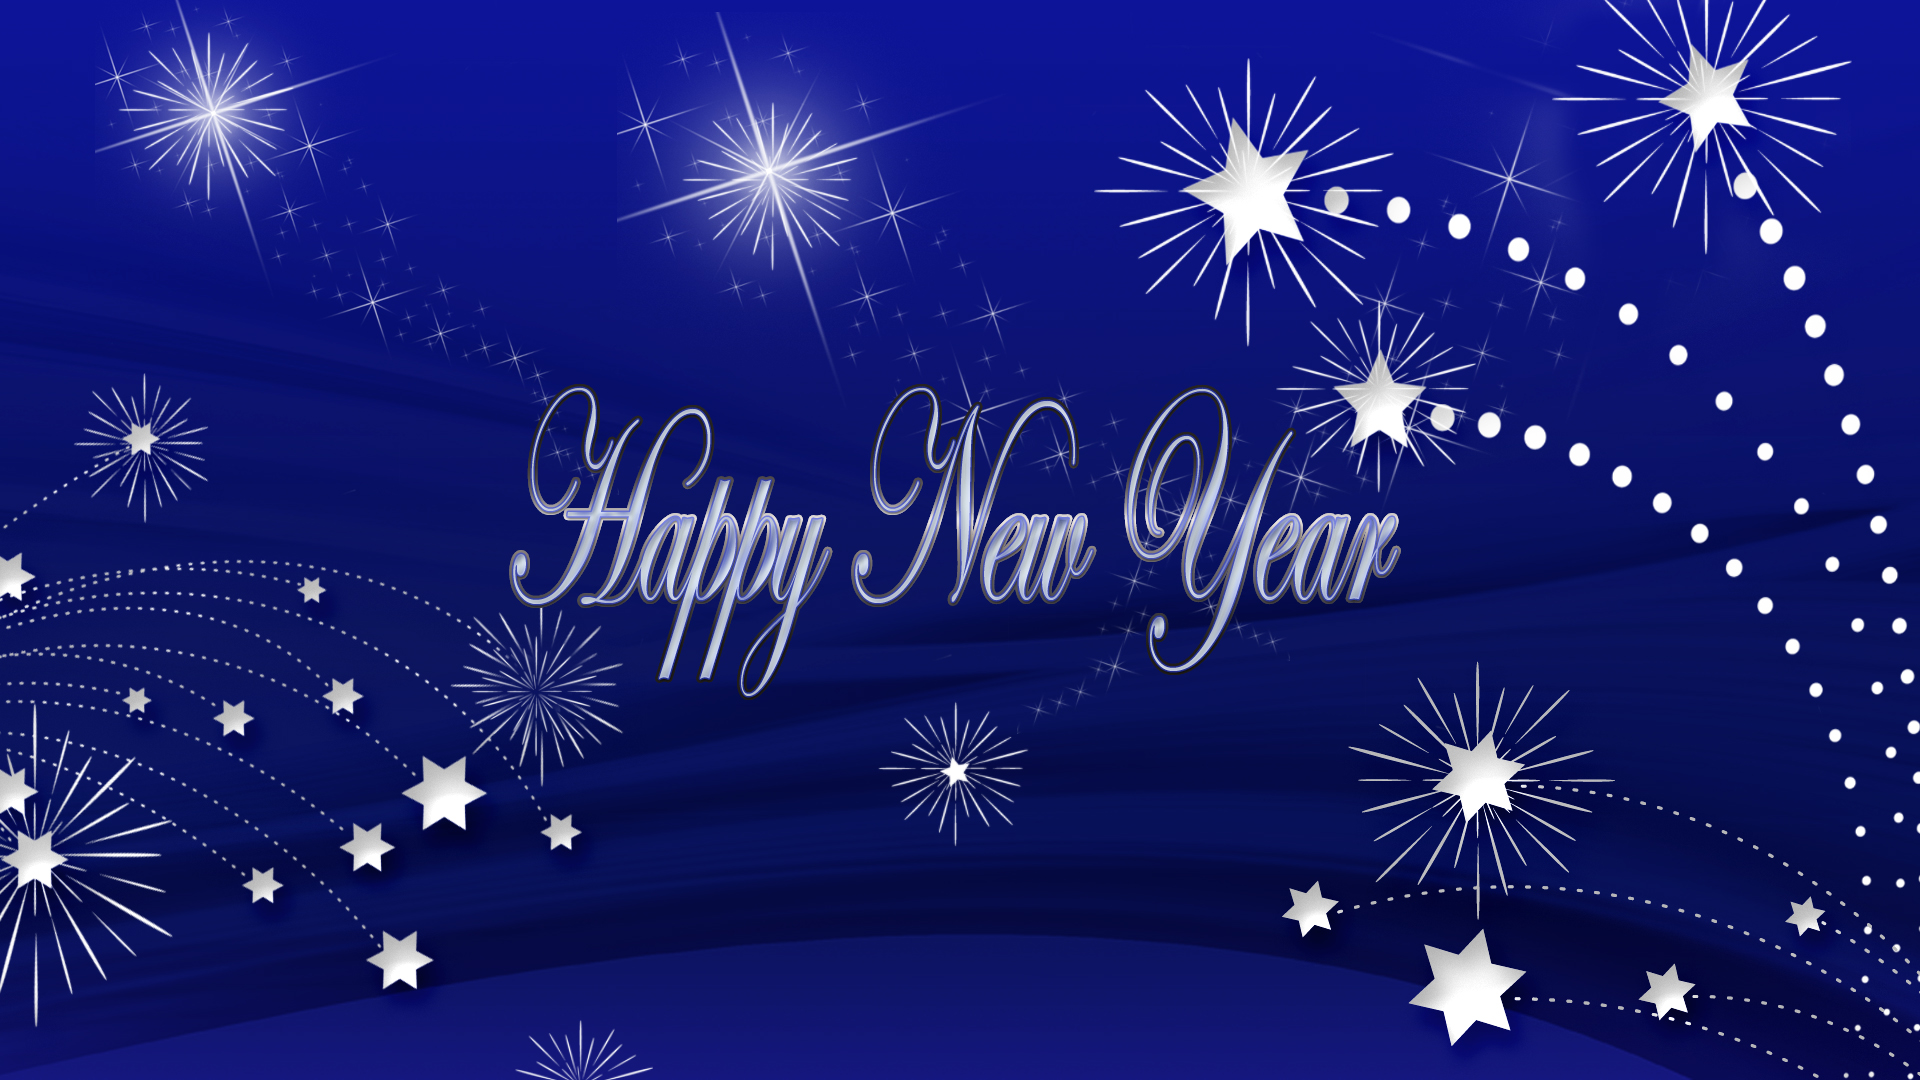 New Year Backround Wallpaper Win10 Themes